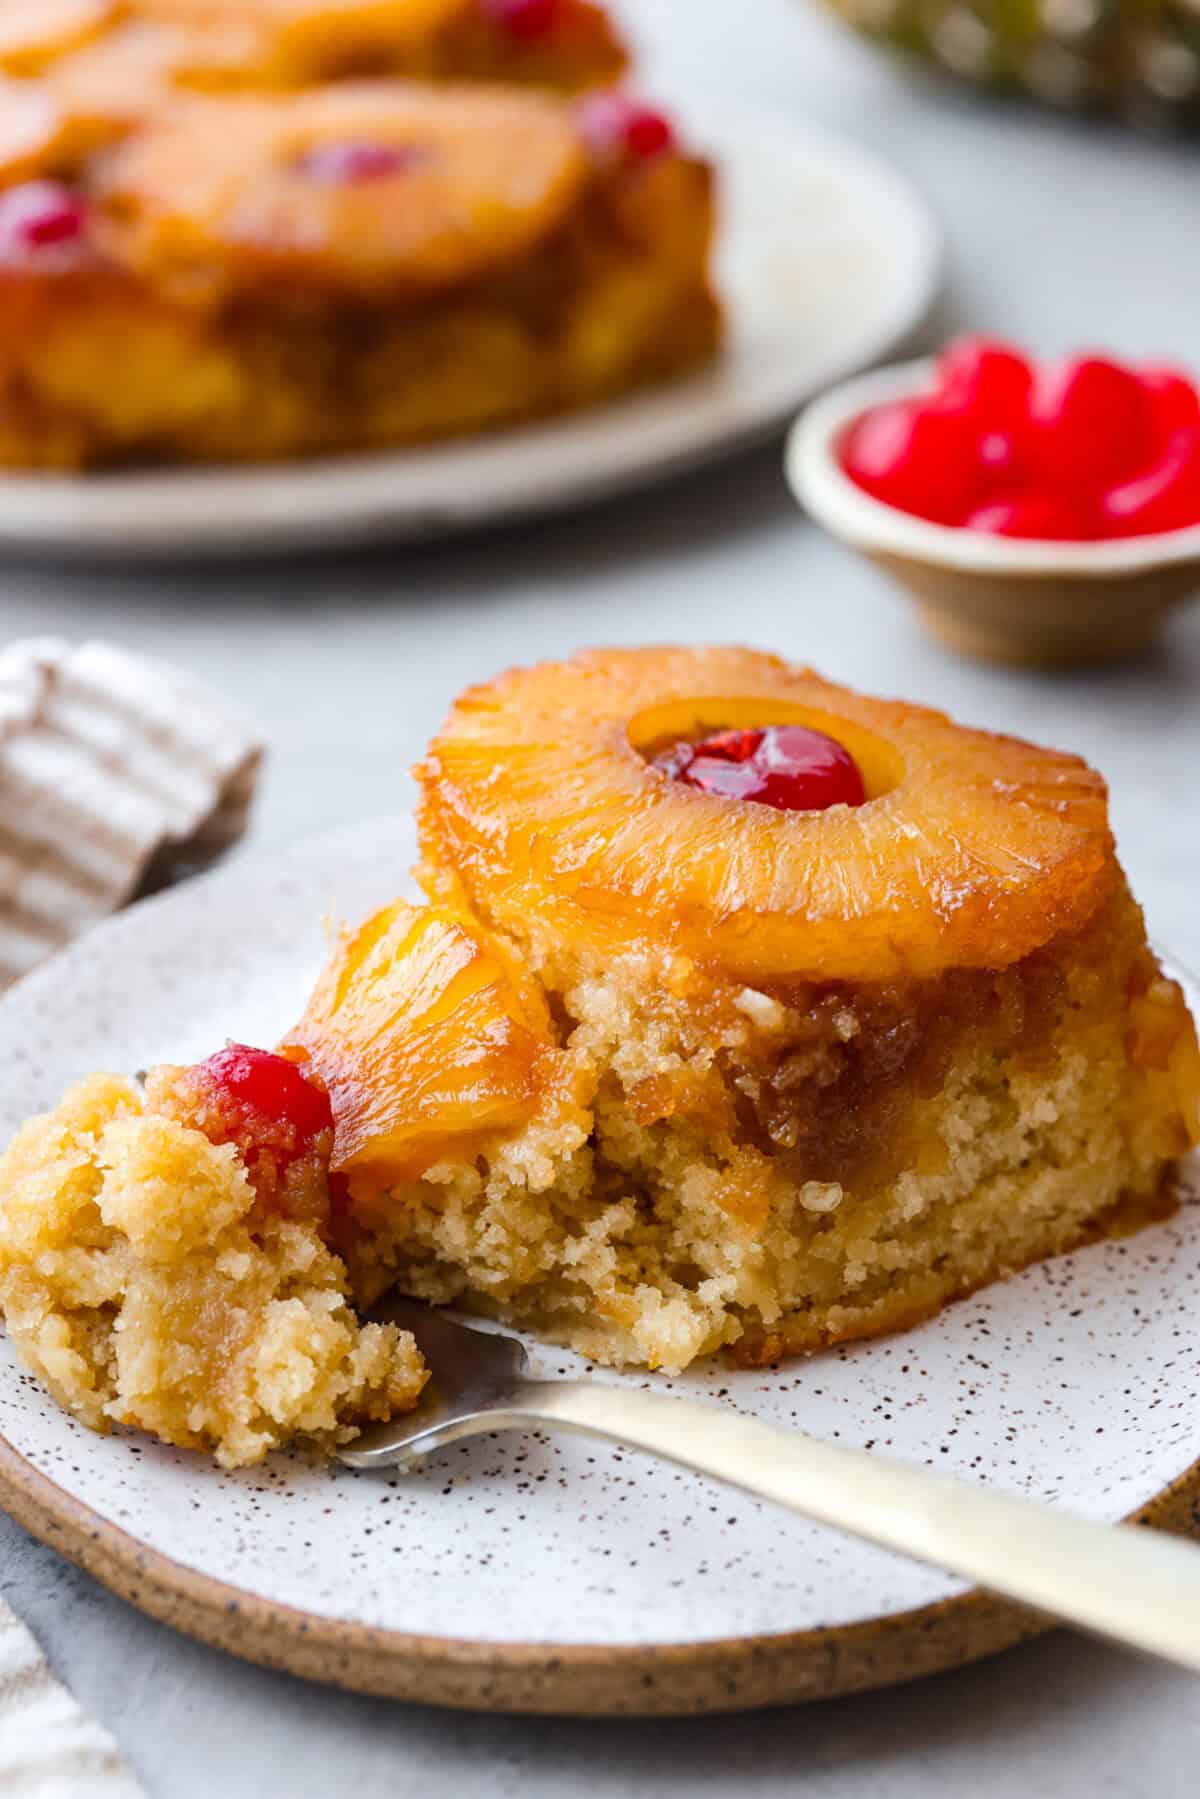 Close view of a slice of pineapple upside down cake on a plate with a fork.